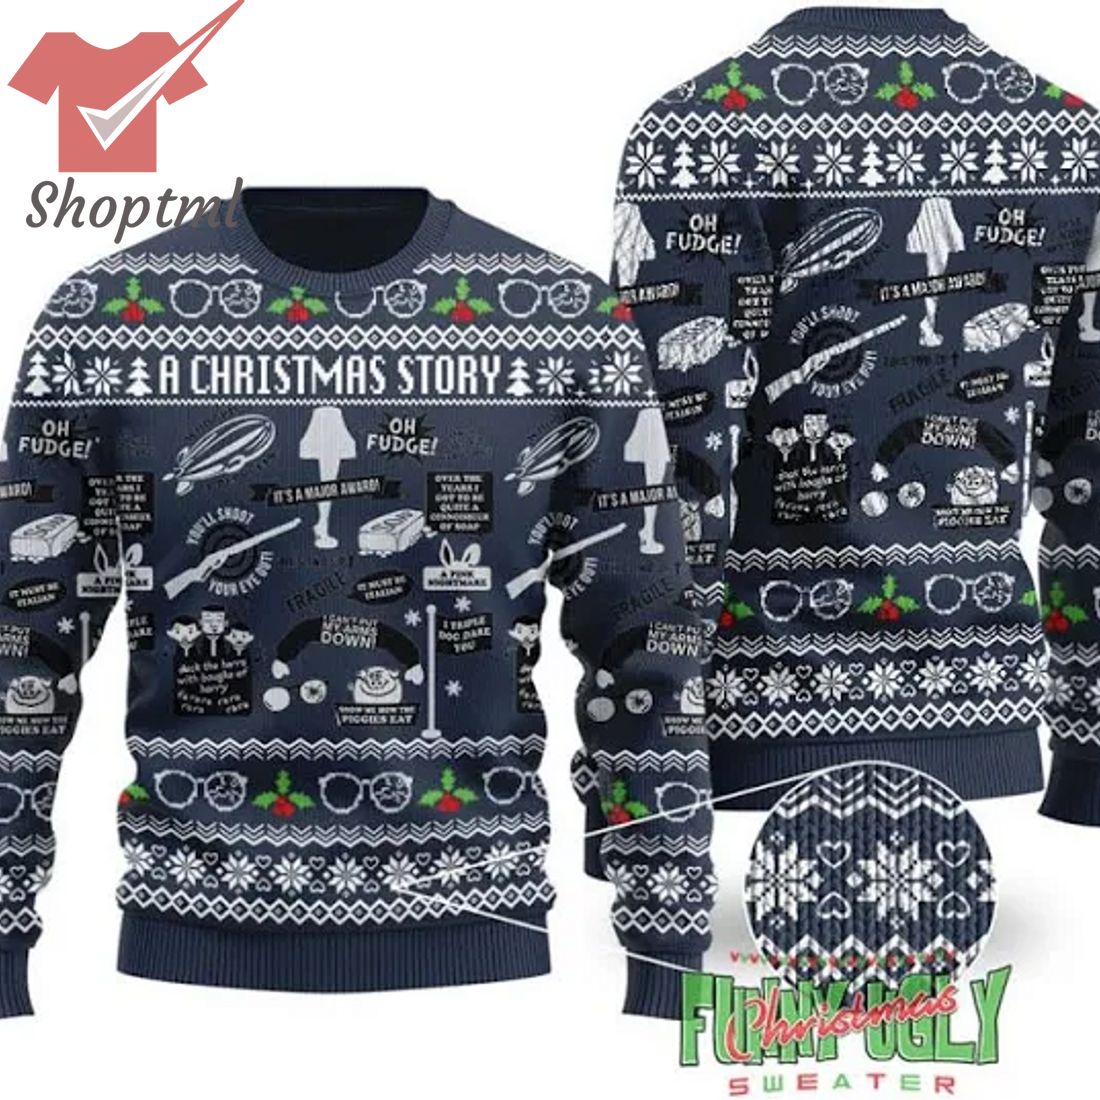 Every christmas has a story sweater